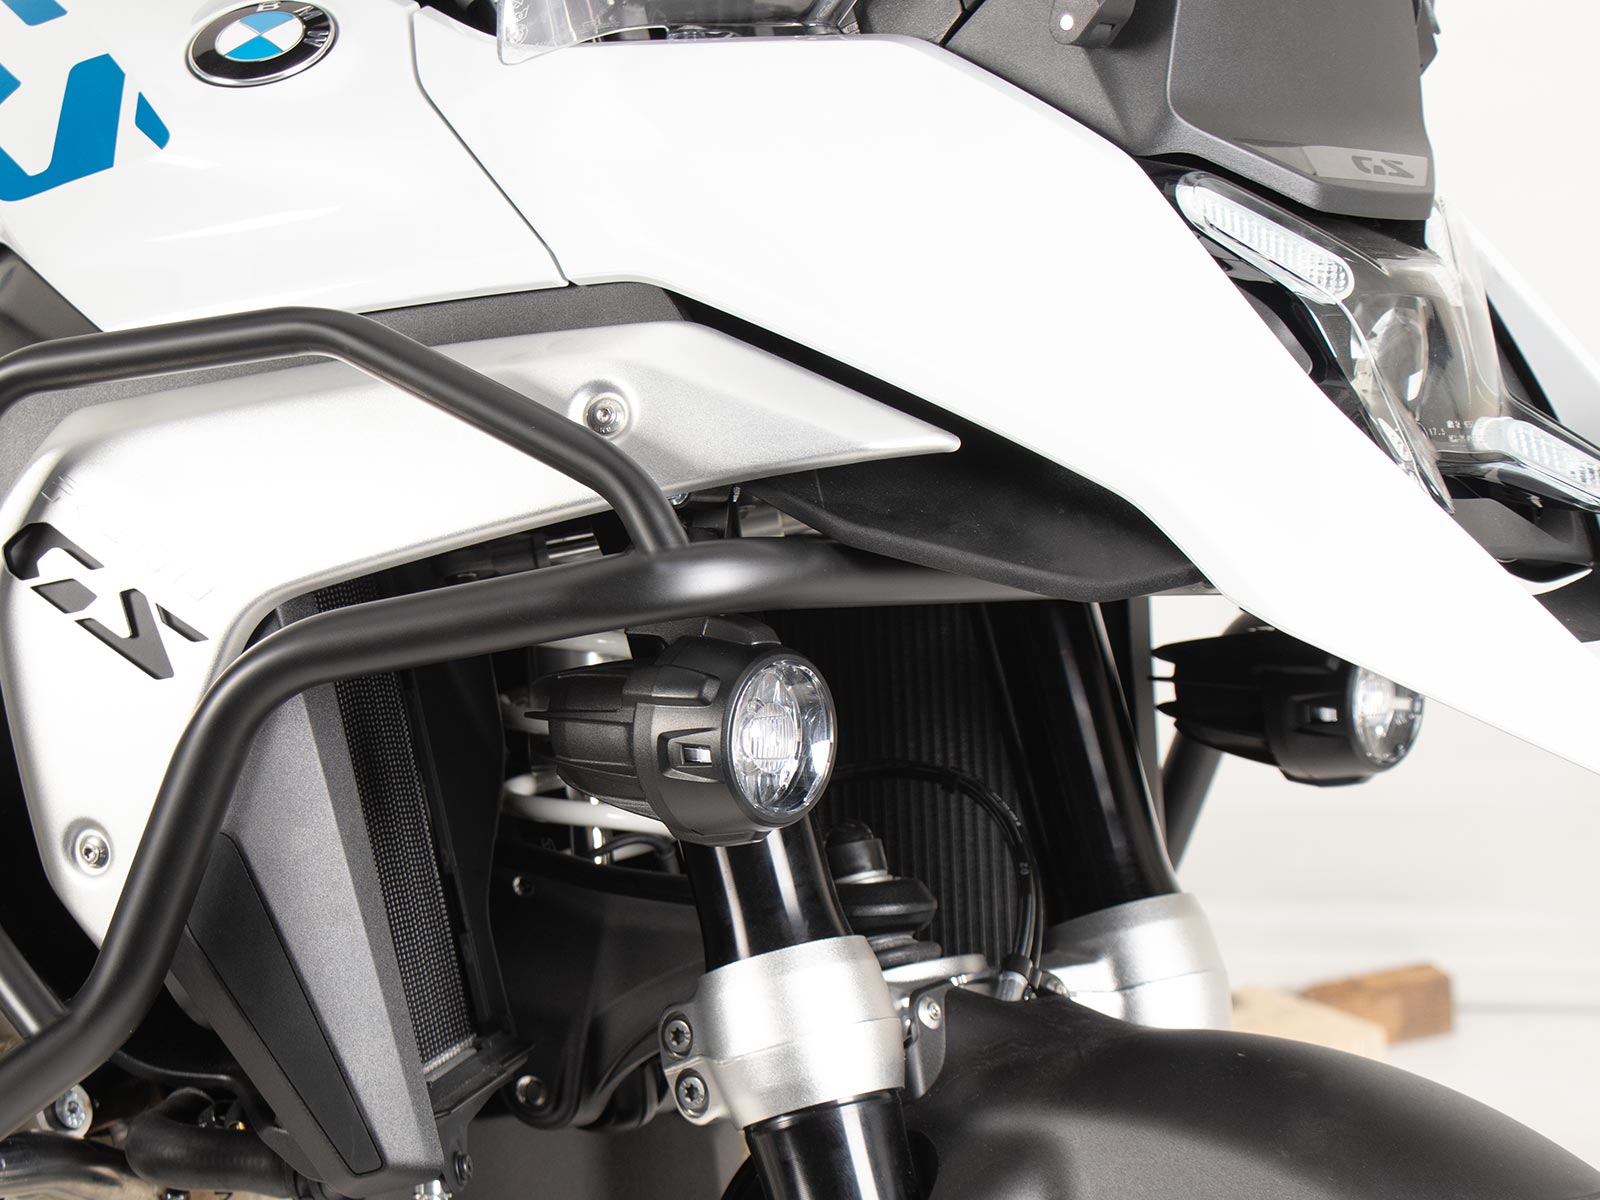 Carrier for original BMW R 1300GS (2023-) fog lights for combination with Hepco&Becker tank guard